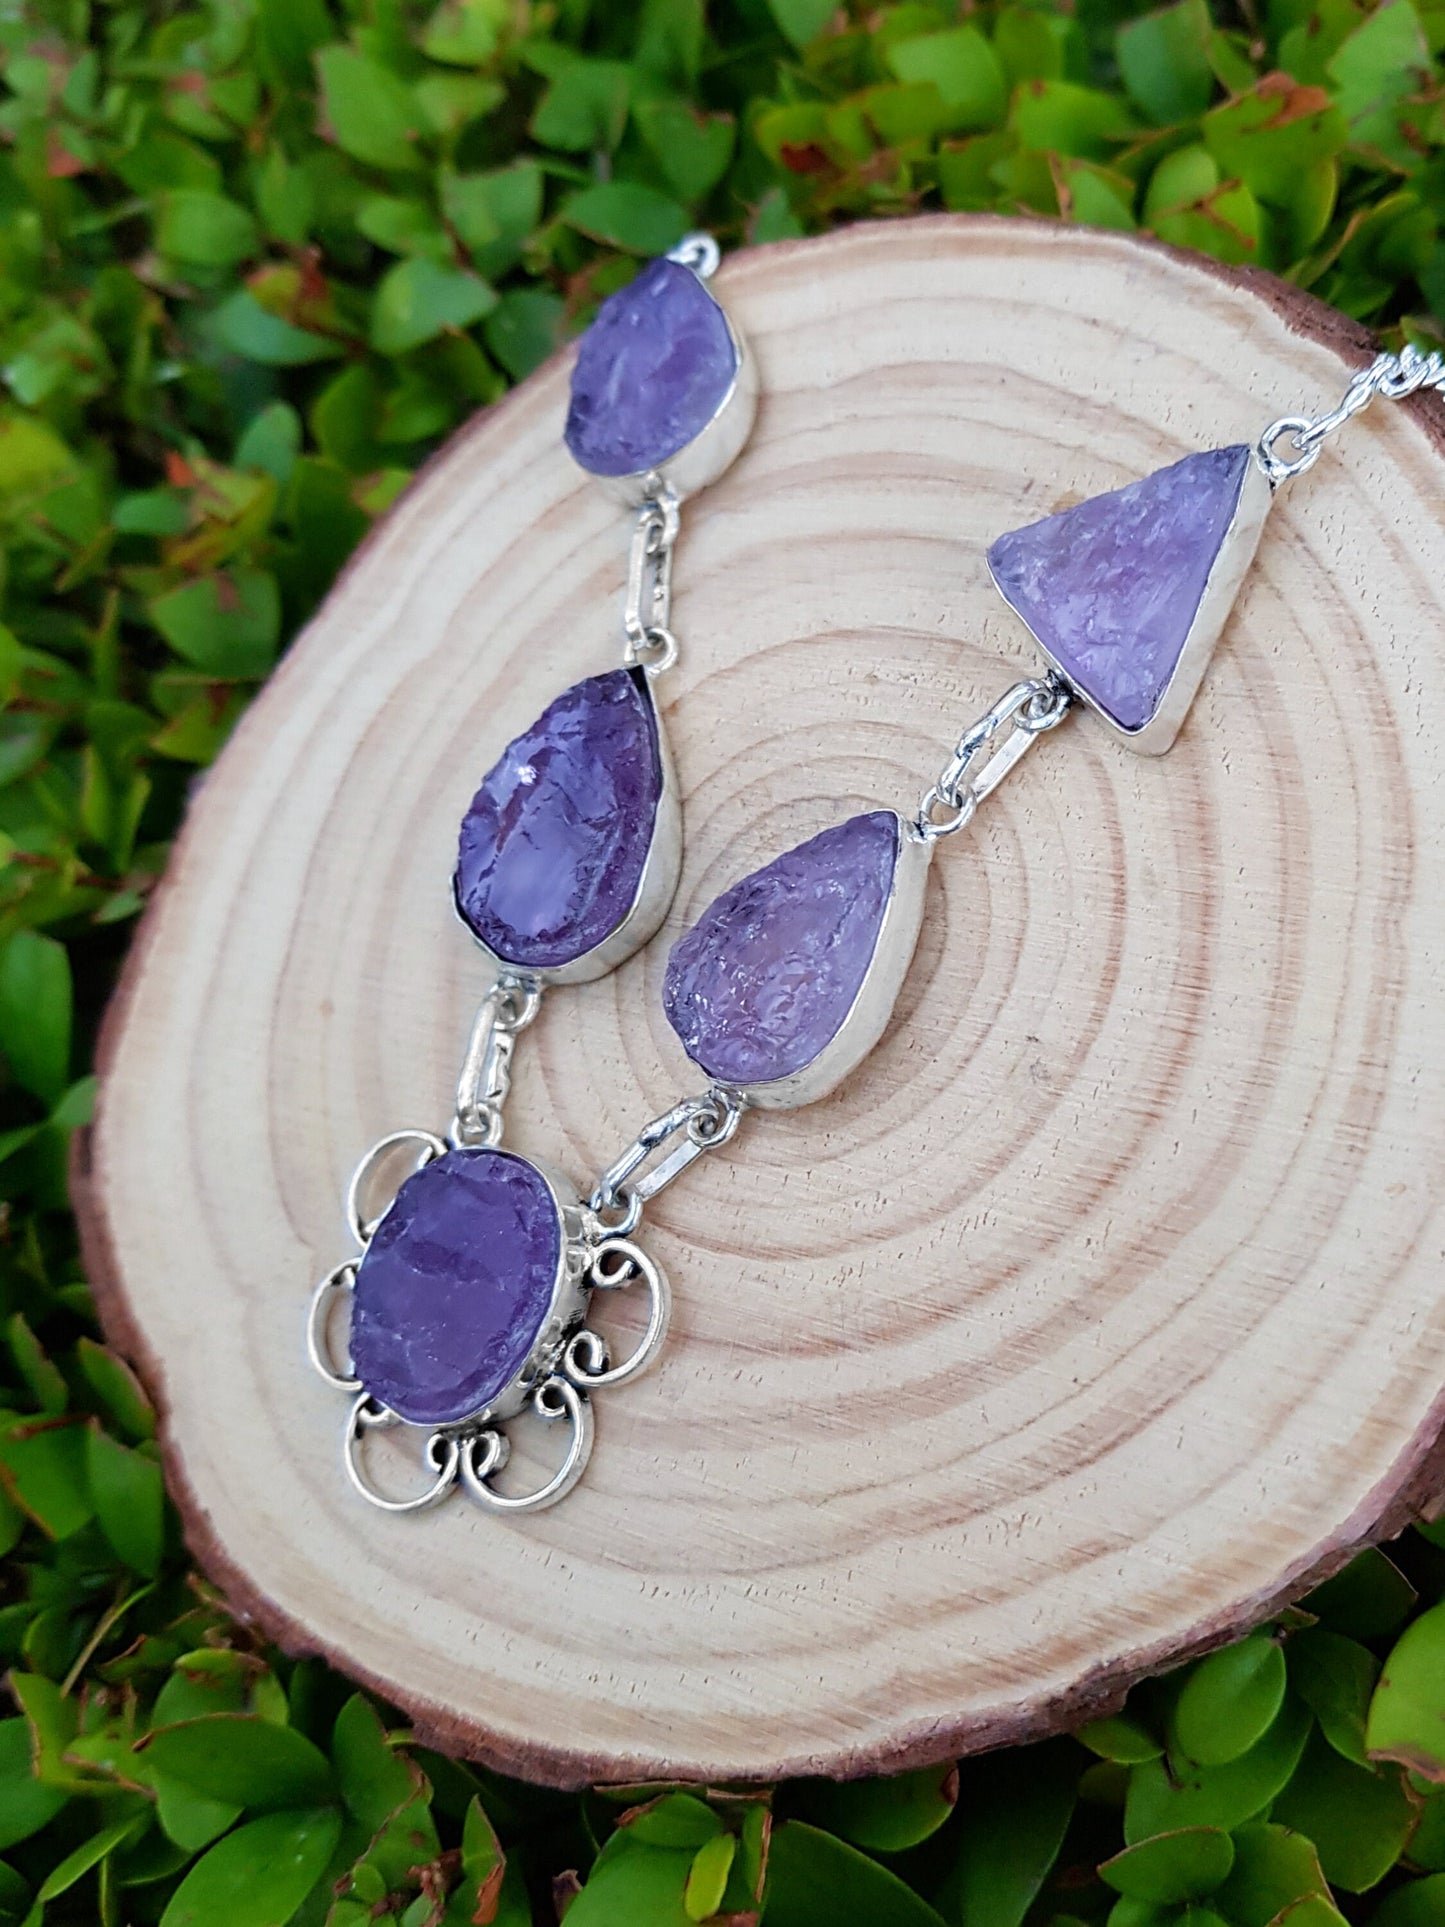 Natural Raw Amethyst Necklace Multi Stone Necklace In Sterling Silver Statement Necklace One Of A Kind